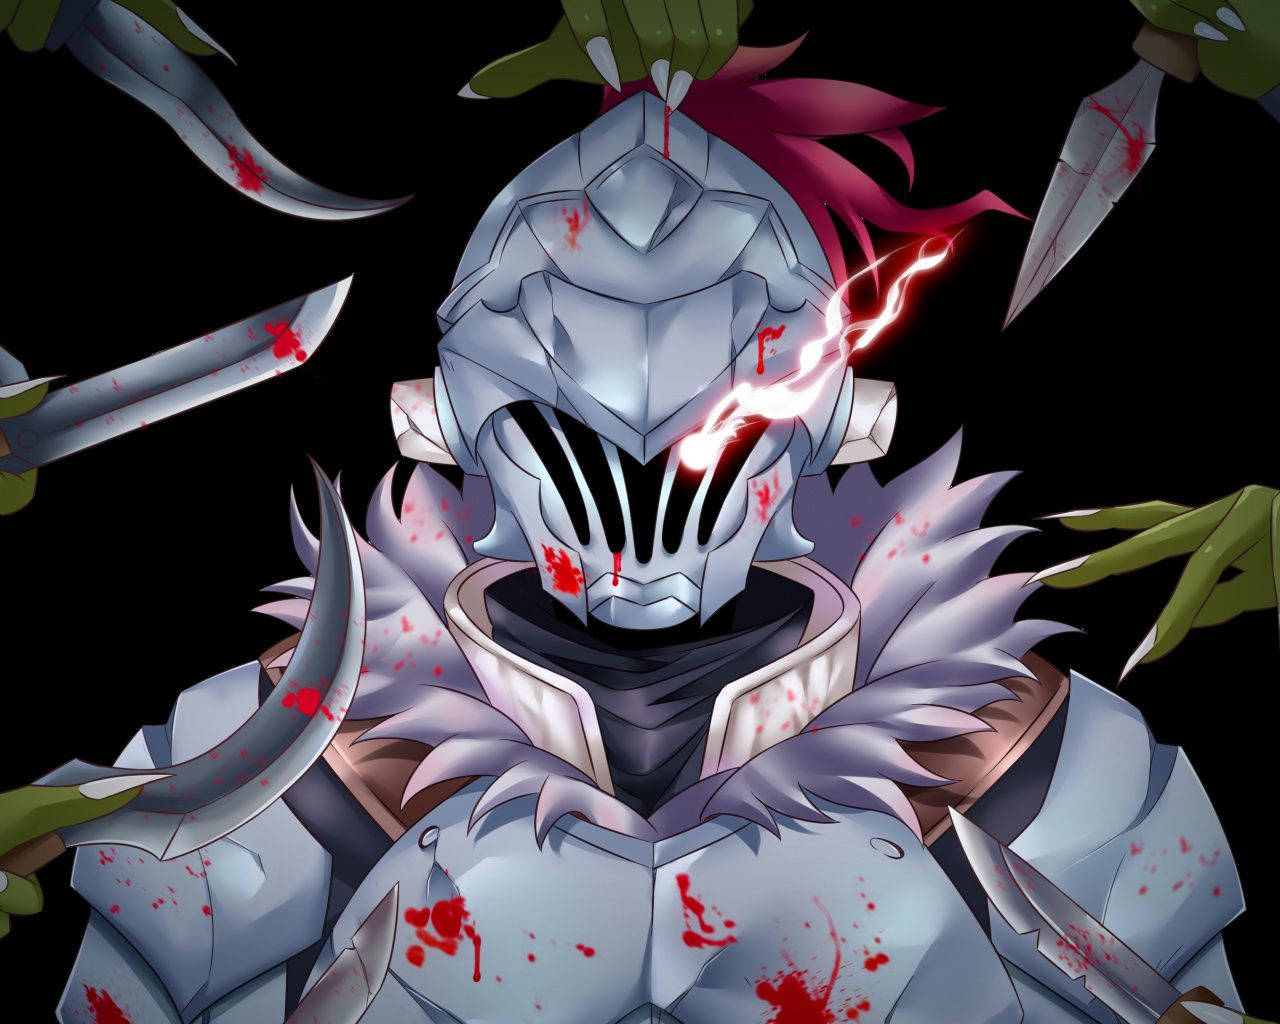 Goblin Slayer, Suited Up In Protective Armor.